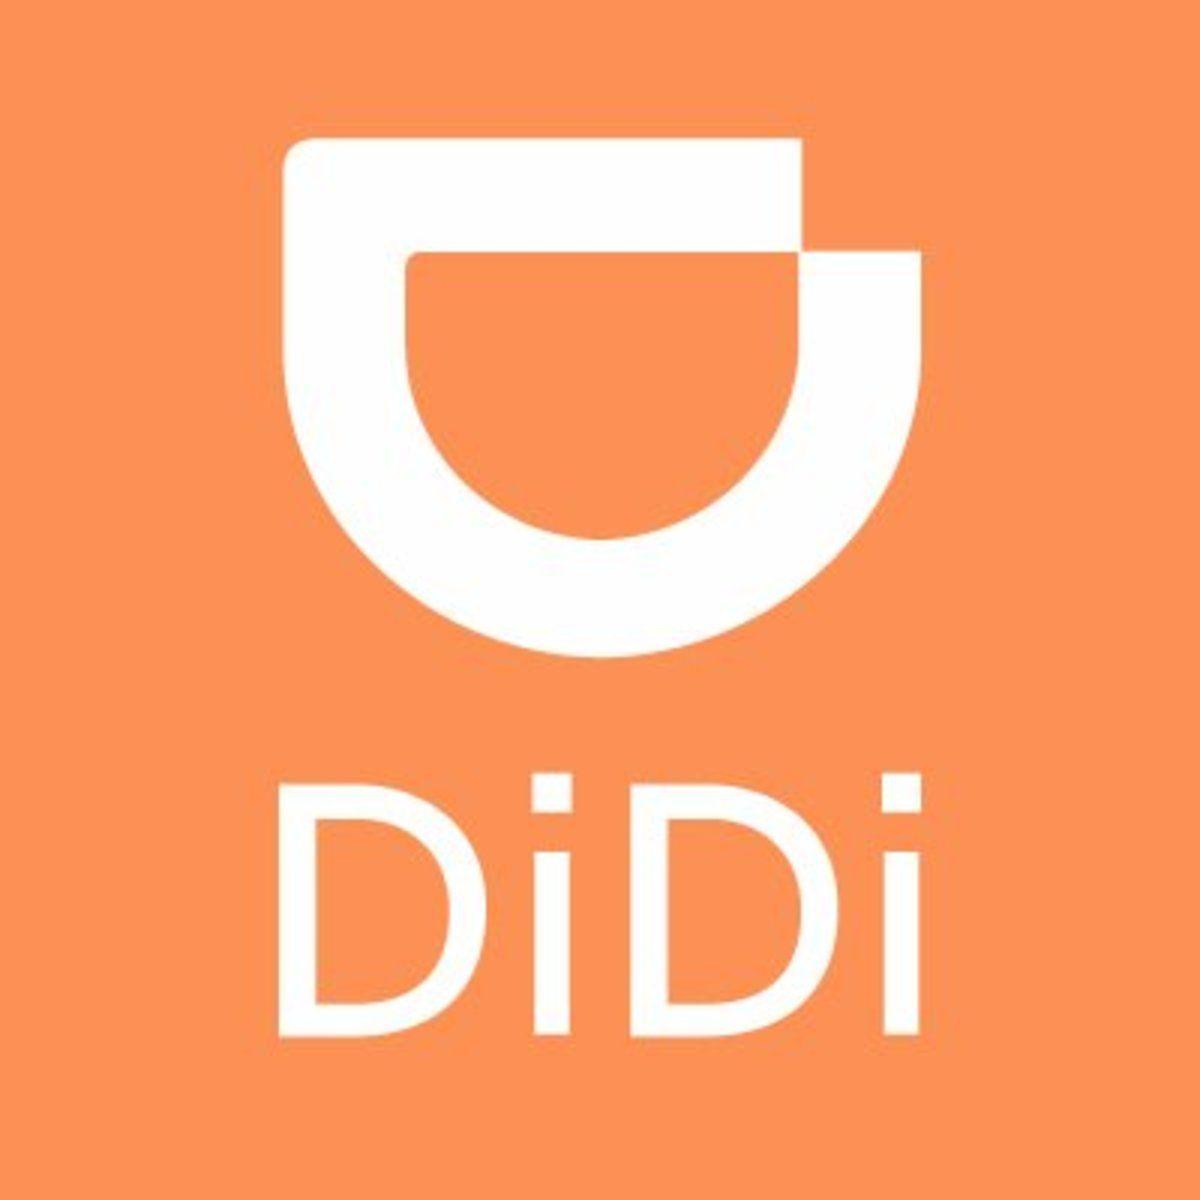 Chinese Didi Logo - The booming dockless bike-share sector and the entry of Didi Chuxing ...